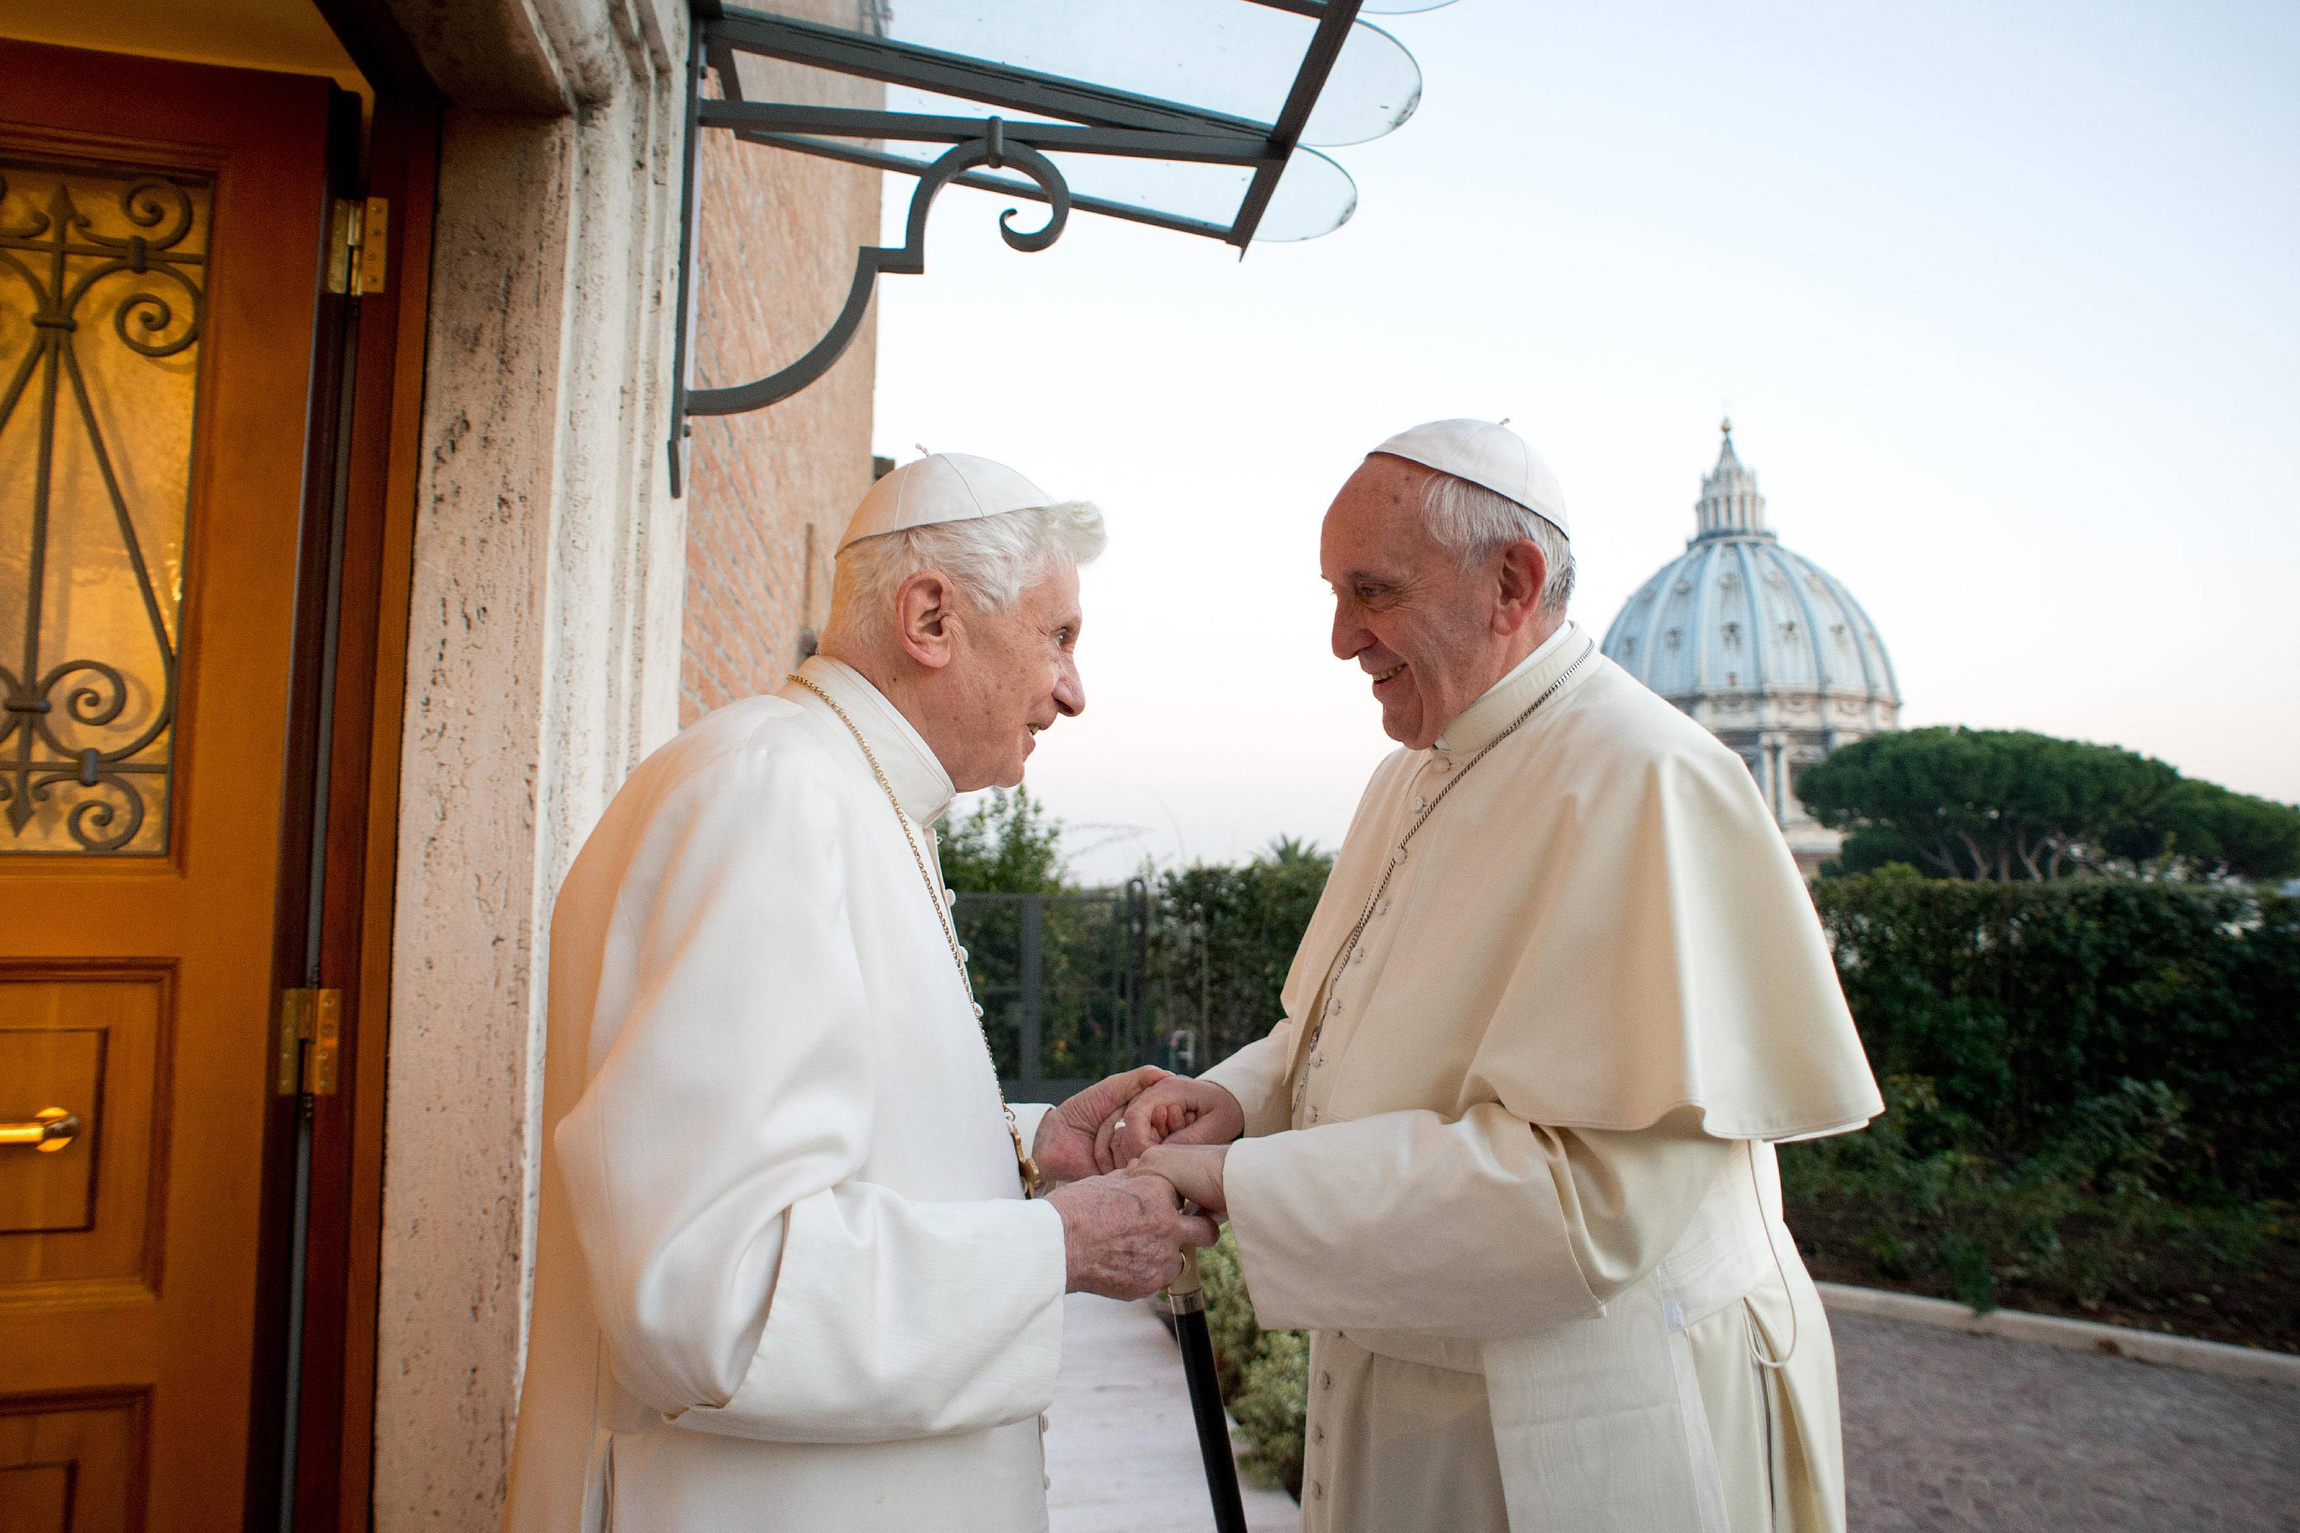 BLOG - DEACON GREG Retired Pope Benedict XVI greets Pope Francis at Mater Ecclesiae monastery at Vatican